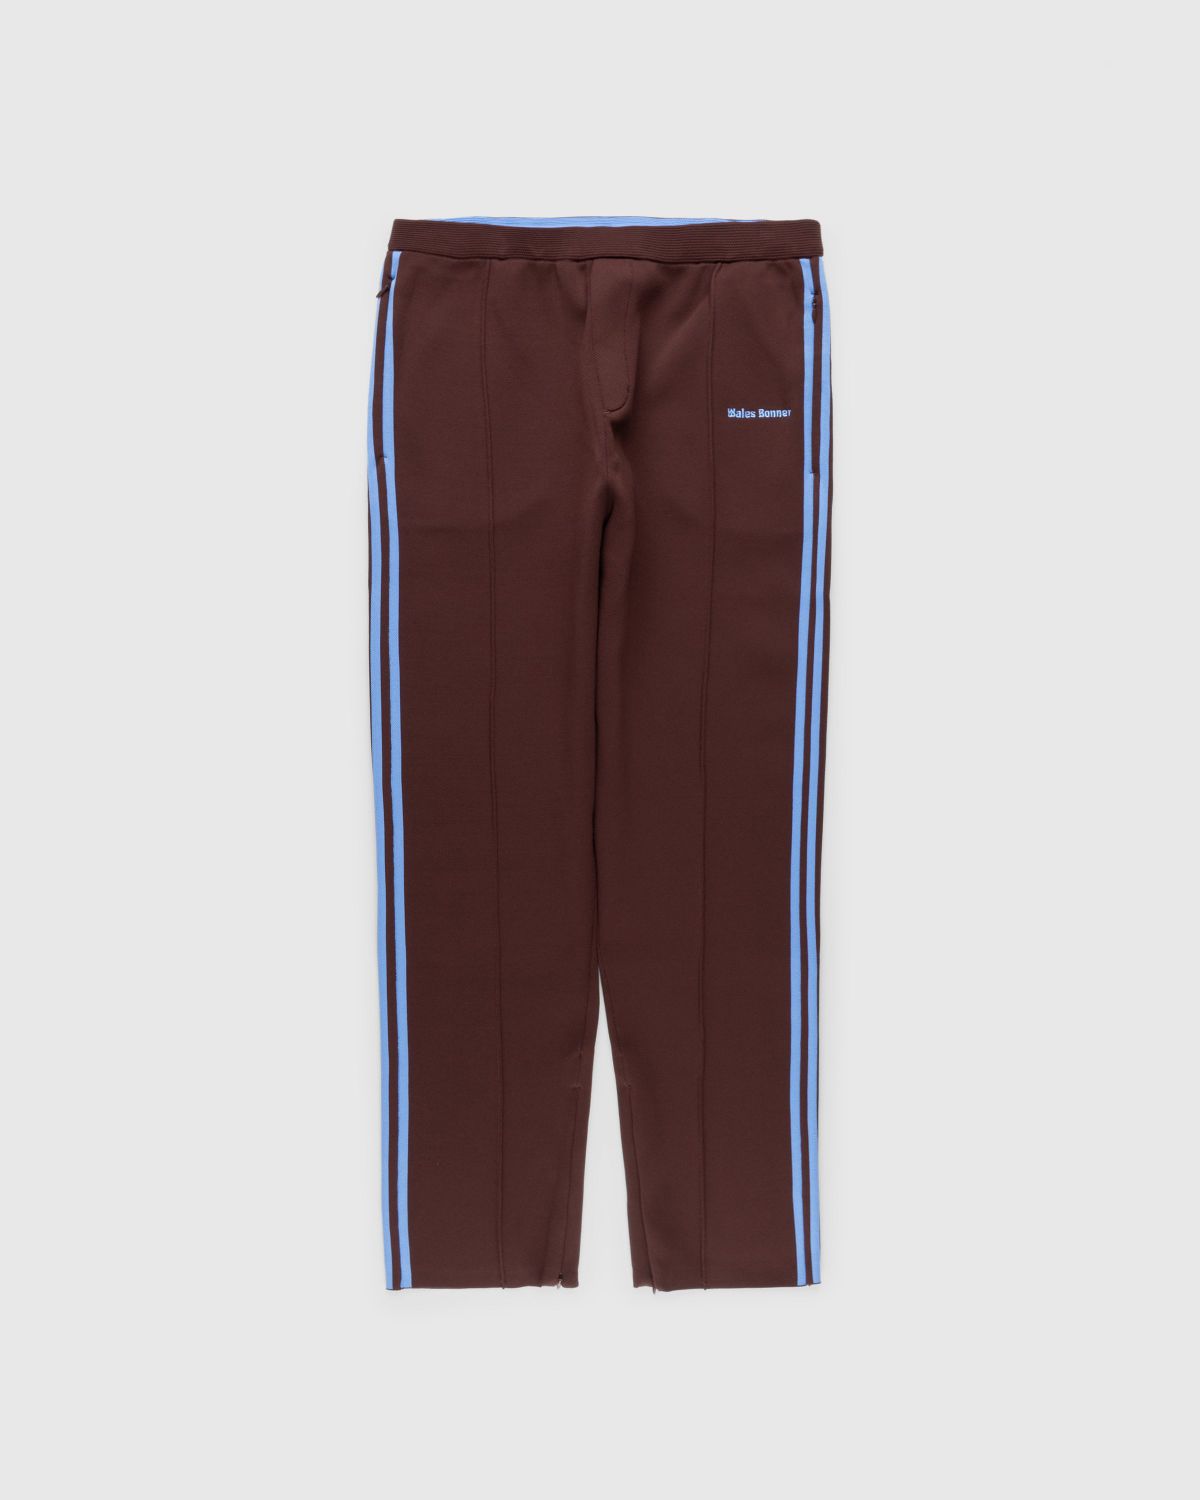 Adidas x Wales Bonner – Knit Track Pant Mystery Brown - Pants - Brown - Image 1